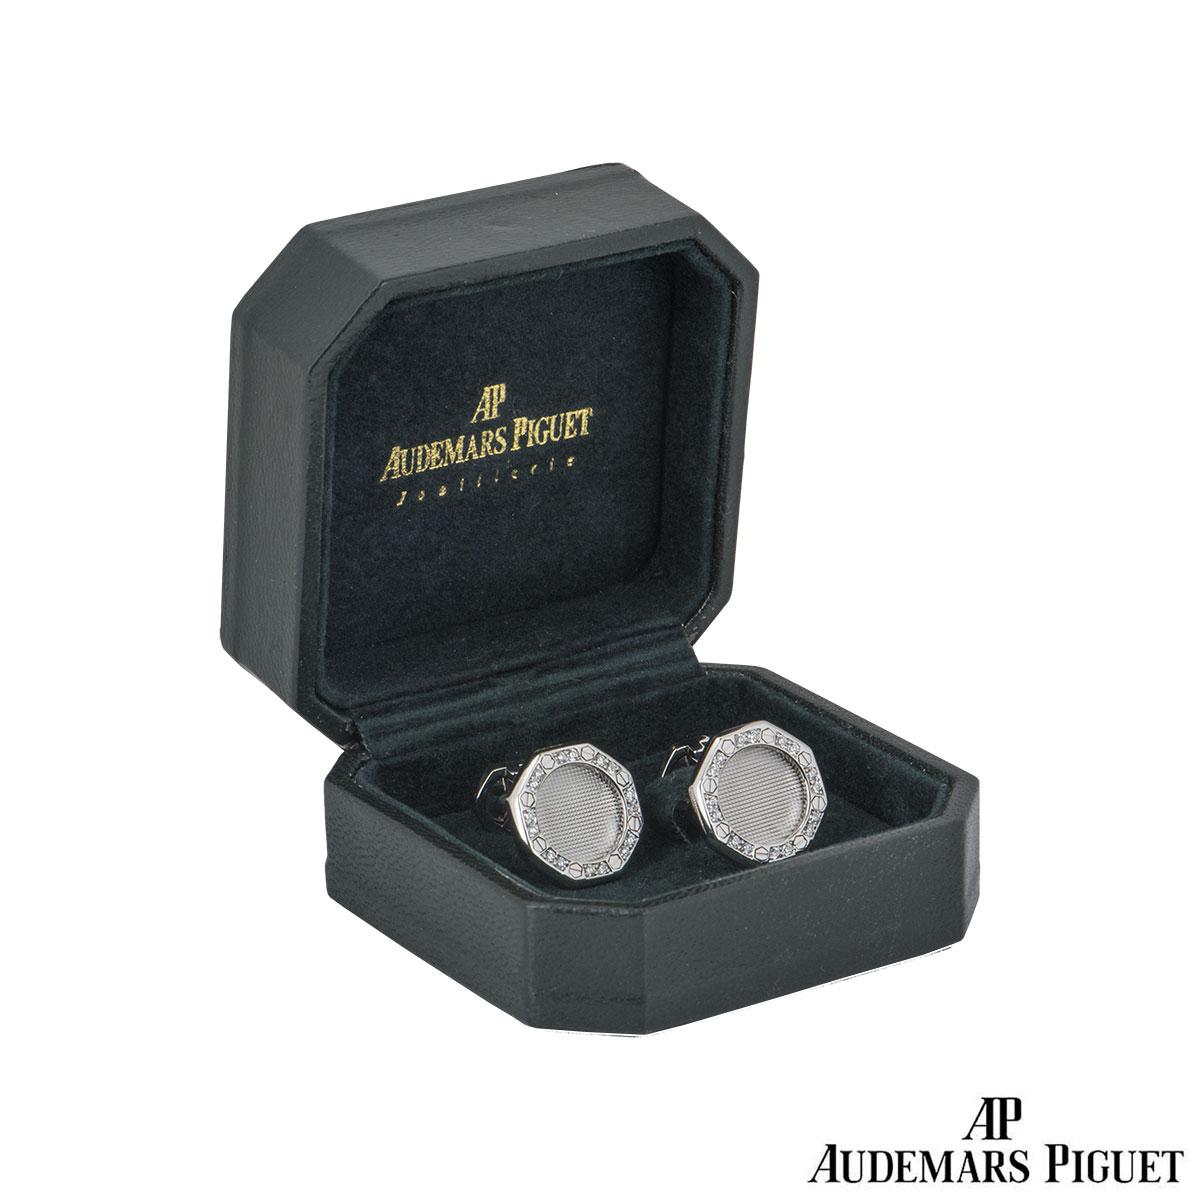 An 18k pair of white gold diamond cufflinks by Audermars Piguet from the Royal Oak collection. The cufflinks feature a waffle design centre, set with the iconic Audemars Piguet screws and 16 round brilliant cut diamonds on each cufflink. The